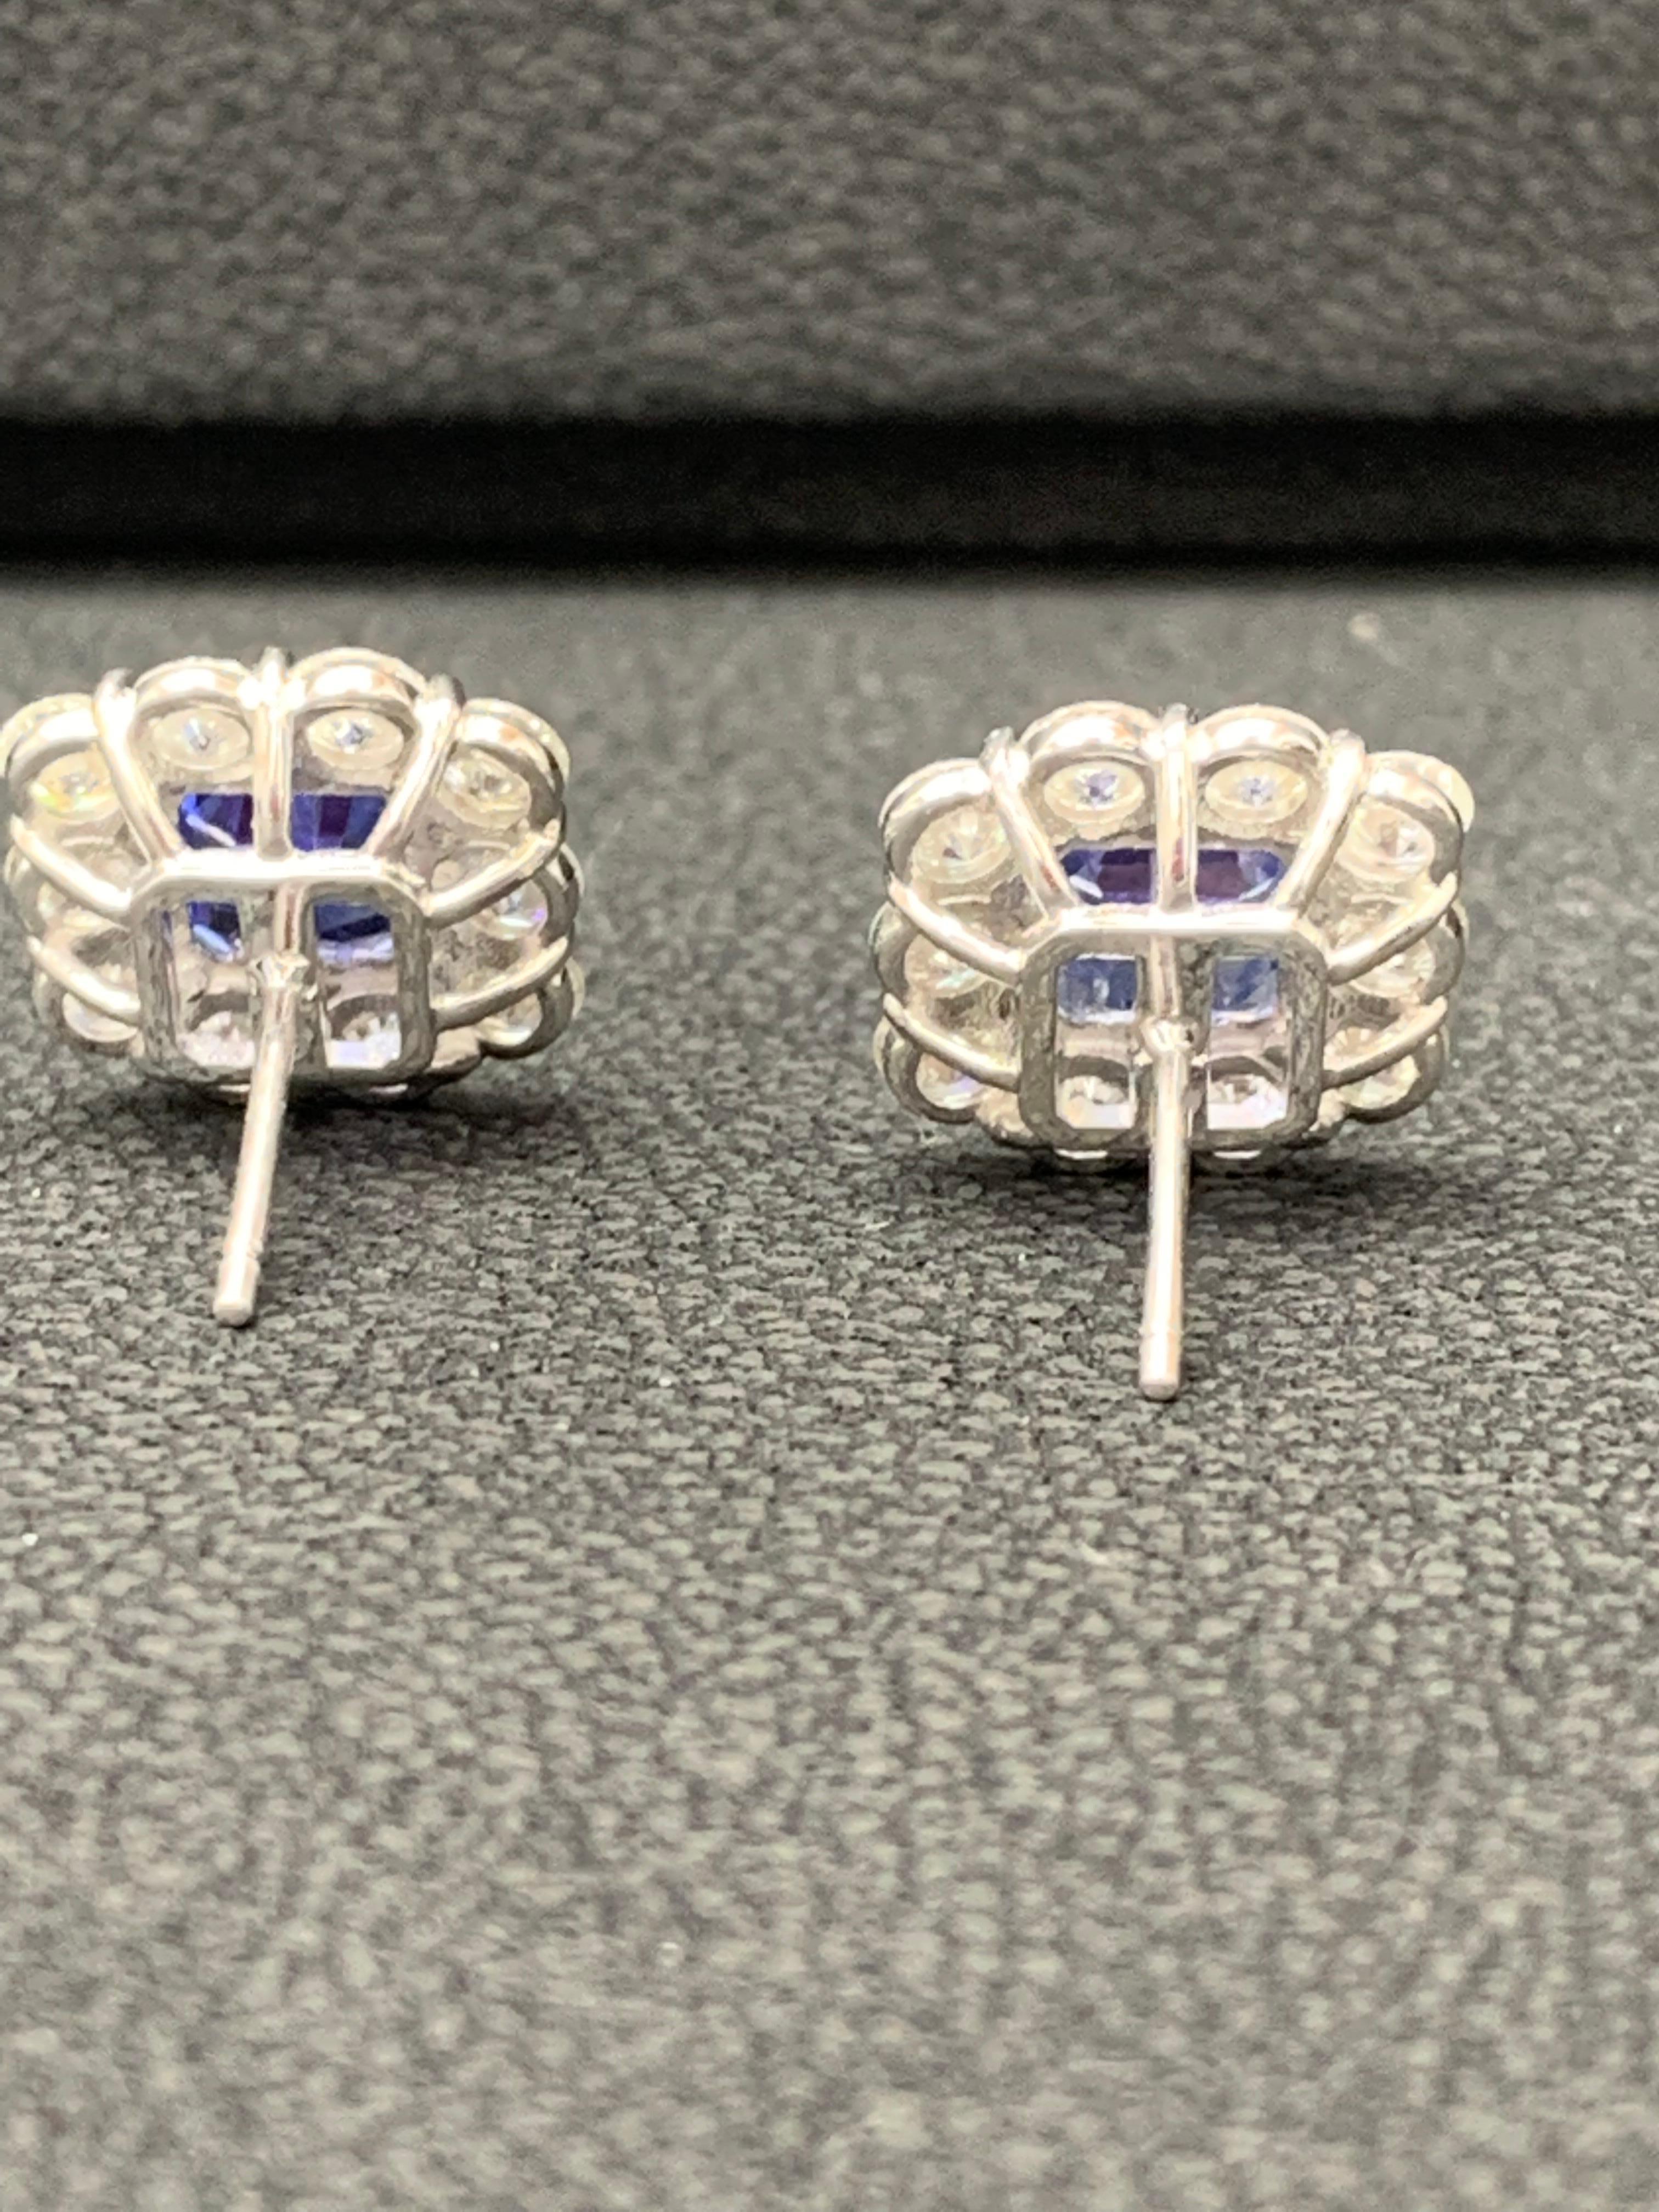 3.02 Carat Emerald Cut Blue Sapphire and Diamond Stud Earrings in 18K White Gold For Sale 2